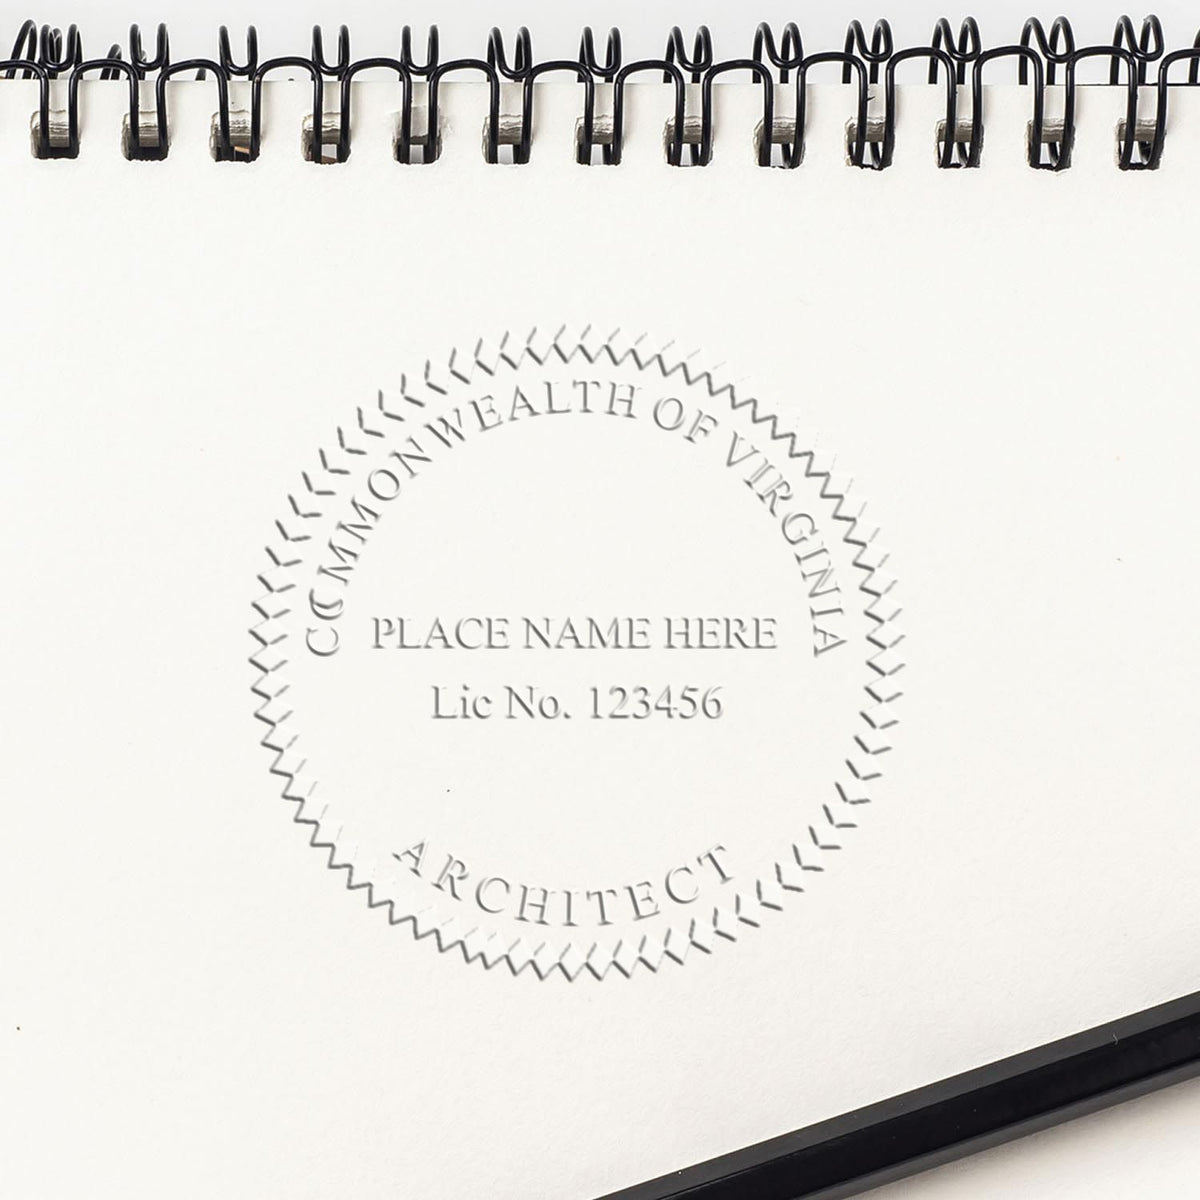 A stamped imprint of the Gift Virginia Architect Seal in this stylish lifestyle photo, setting the tone for a unique and personalized product.